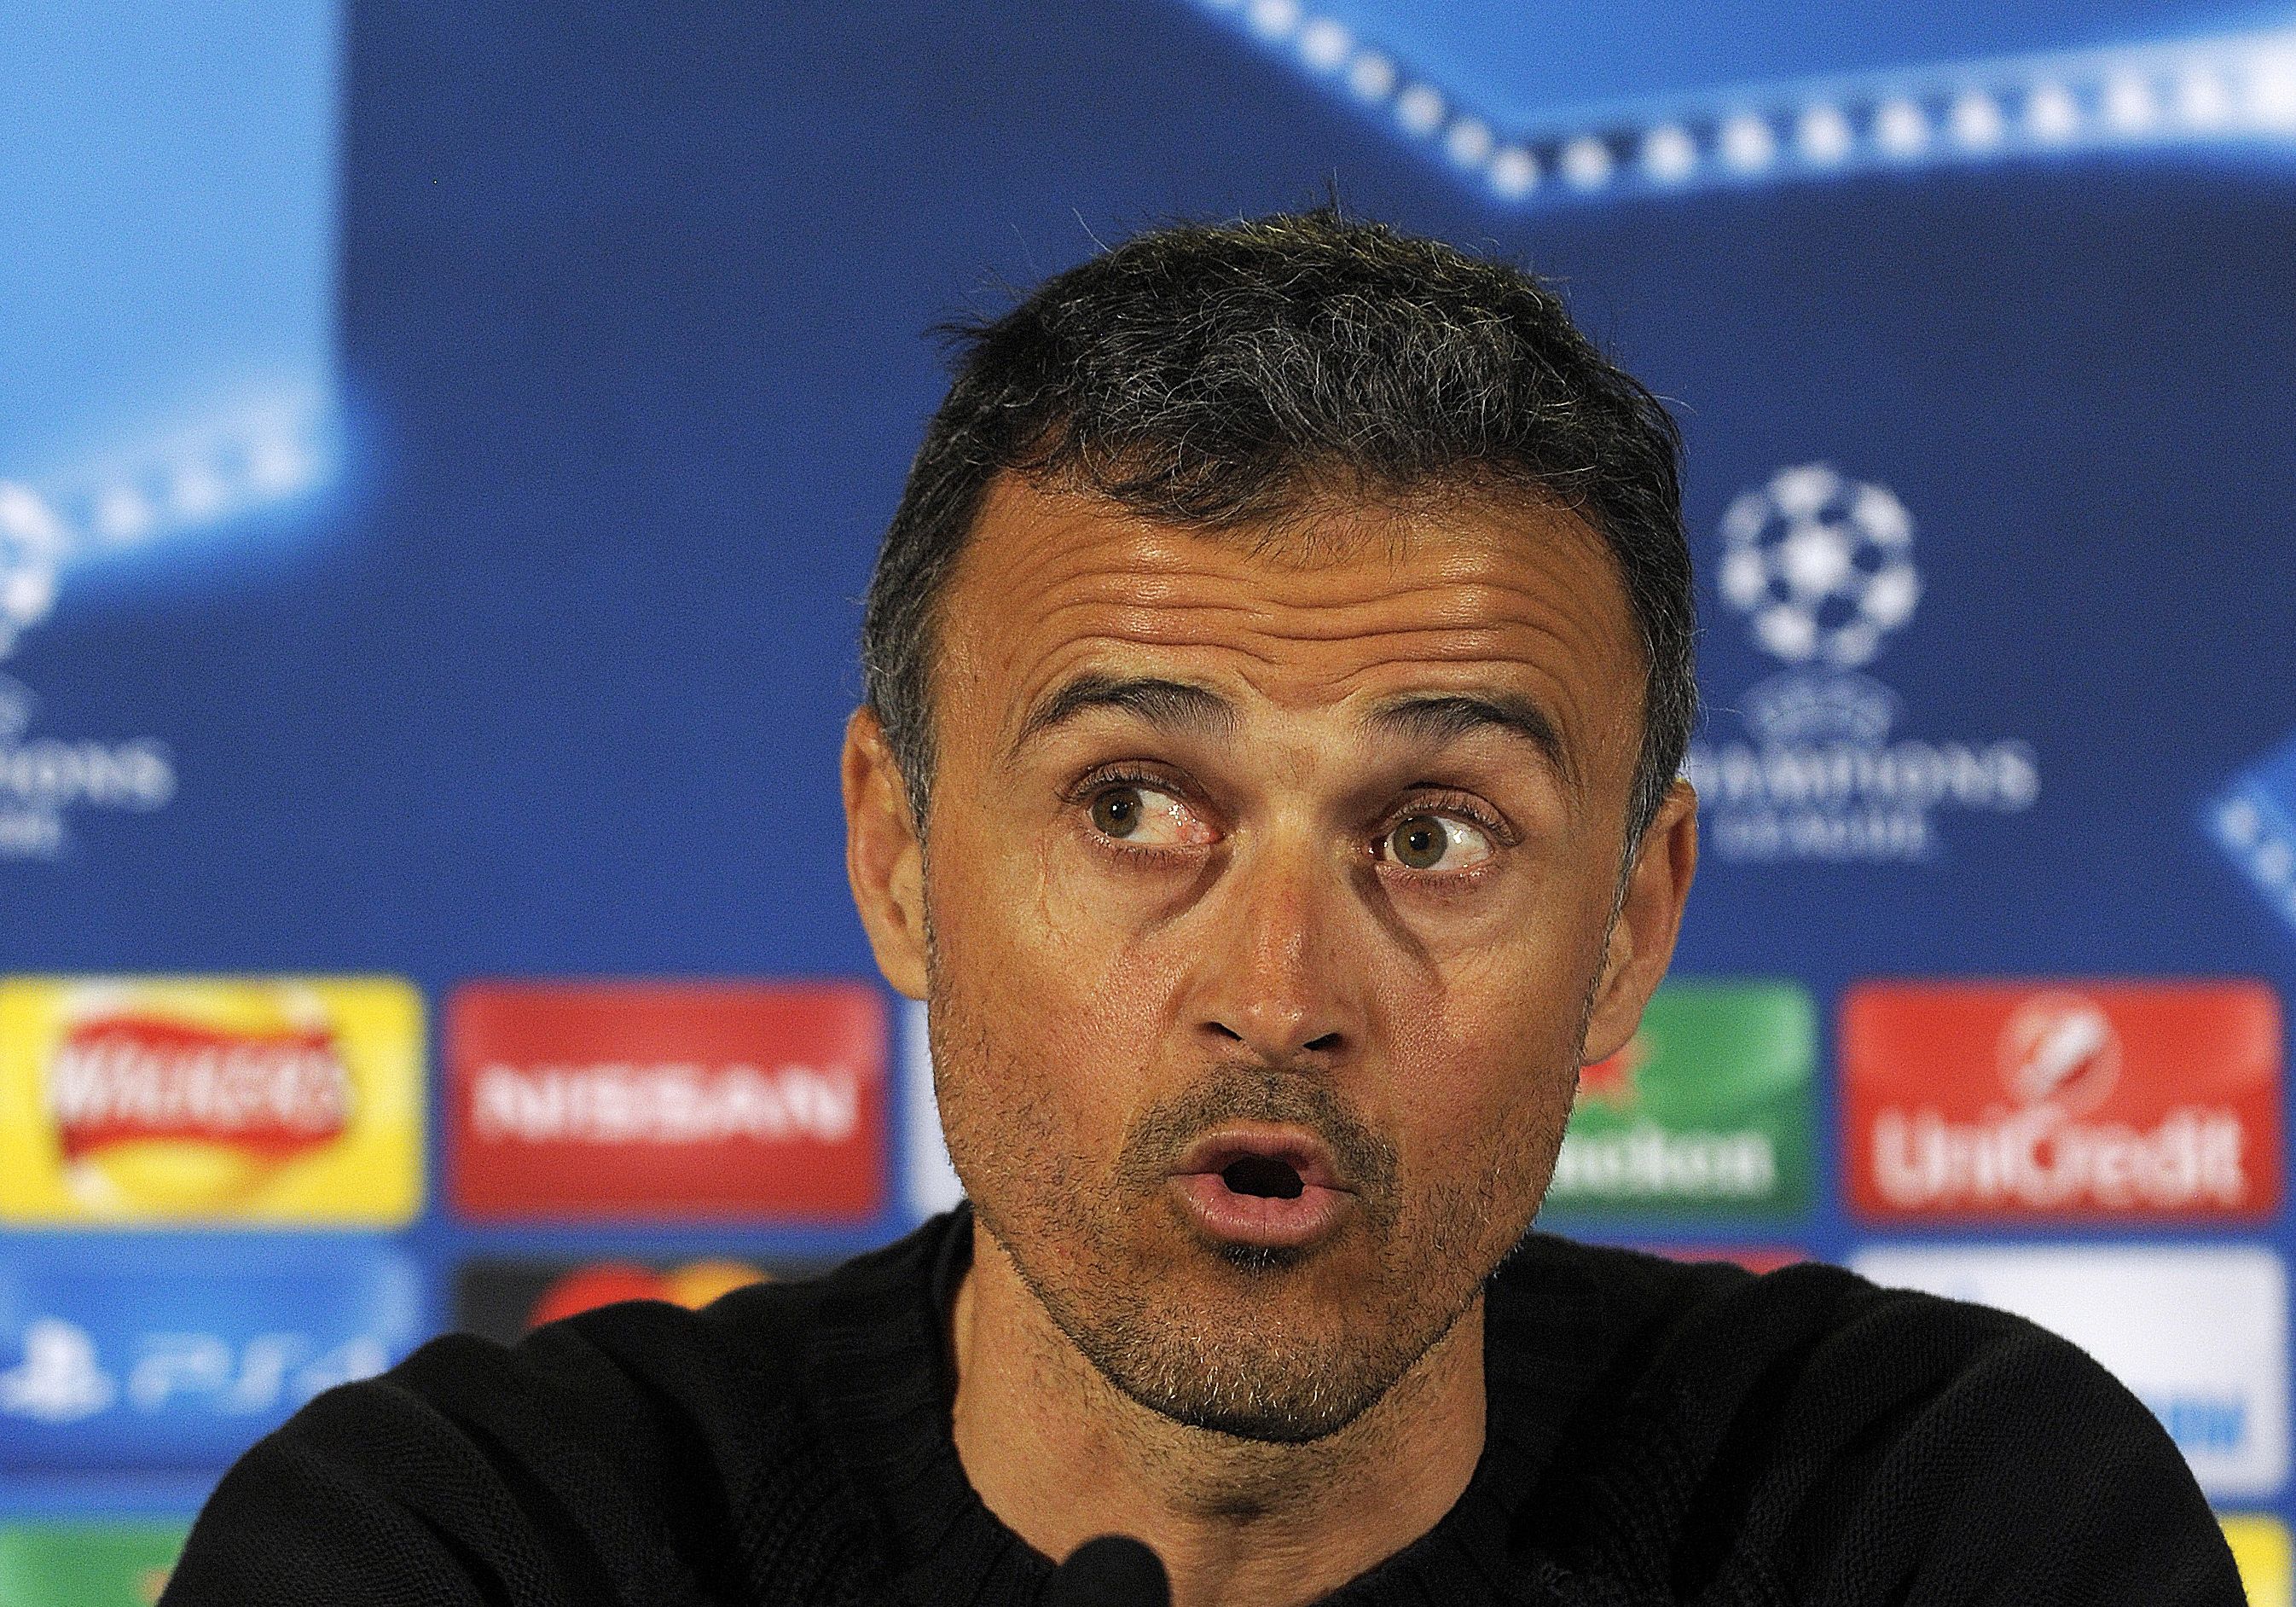 Barcelona's coach Luis Enrique attends a press conference at Celtic Park stadium in Glasgow on November 22, 2016 ahead of their UEFA Champions League group C football match against Celtic in Glasgow on November 23.  / AFP / Andy Buchanan        (Photo credit should read ANDY BUCHANAN/AFP/Getty Images)